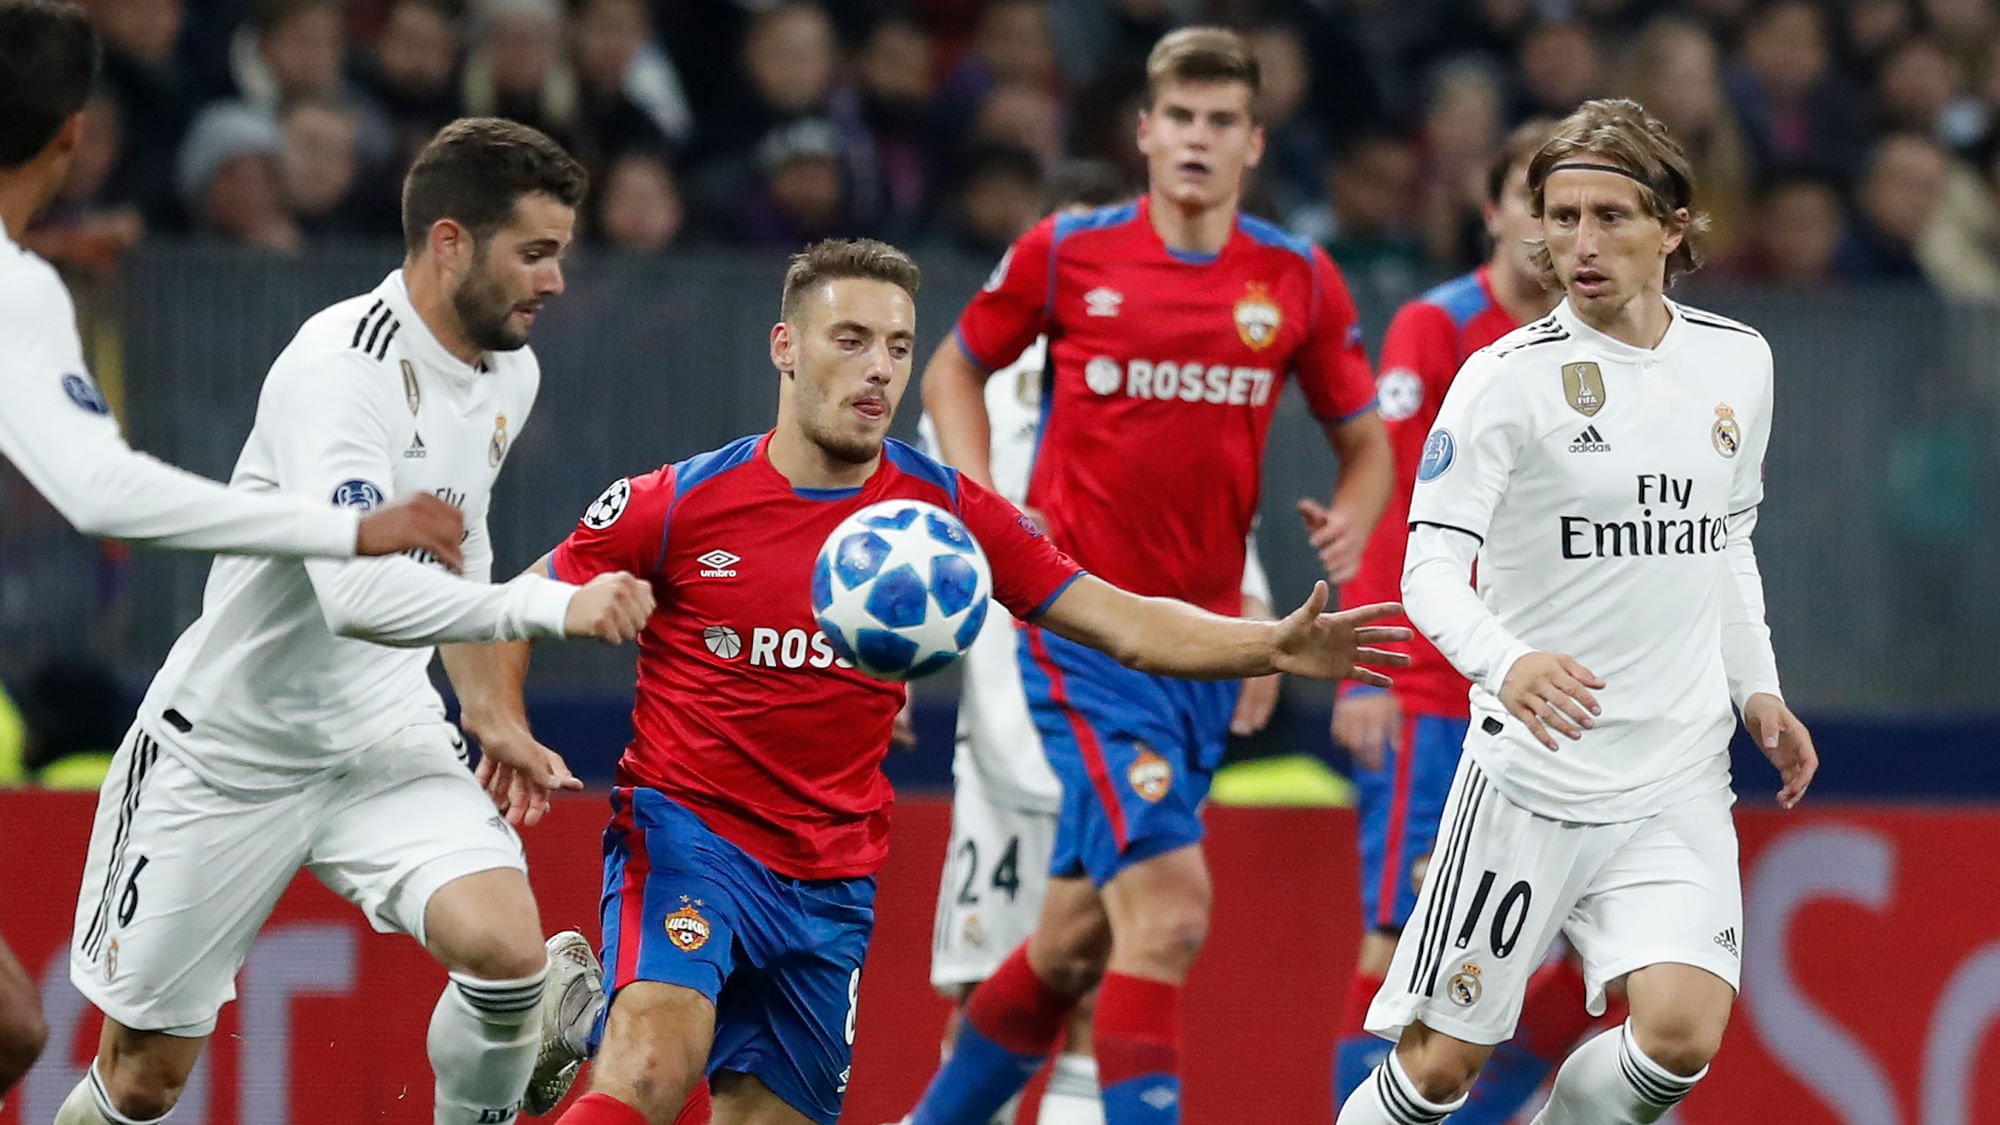 CSKA midfielder Nikola Vlasic, center, challenge for the ball with Real midfielder Luka Modric, right, and Real defender Nacho Fernandez during a Group G Champions League soccer match.&nbsp;